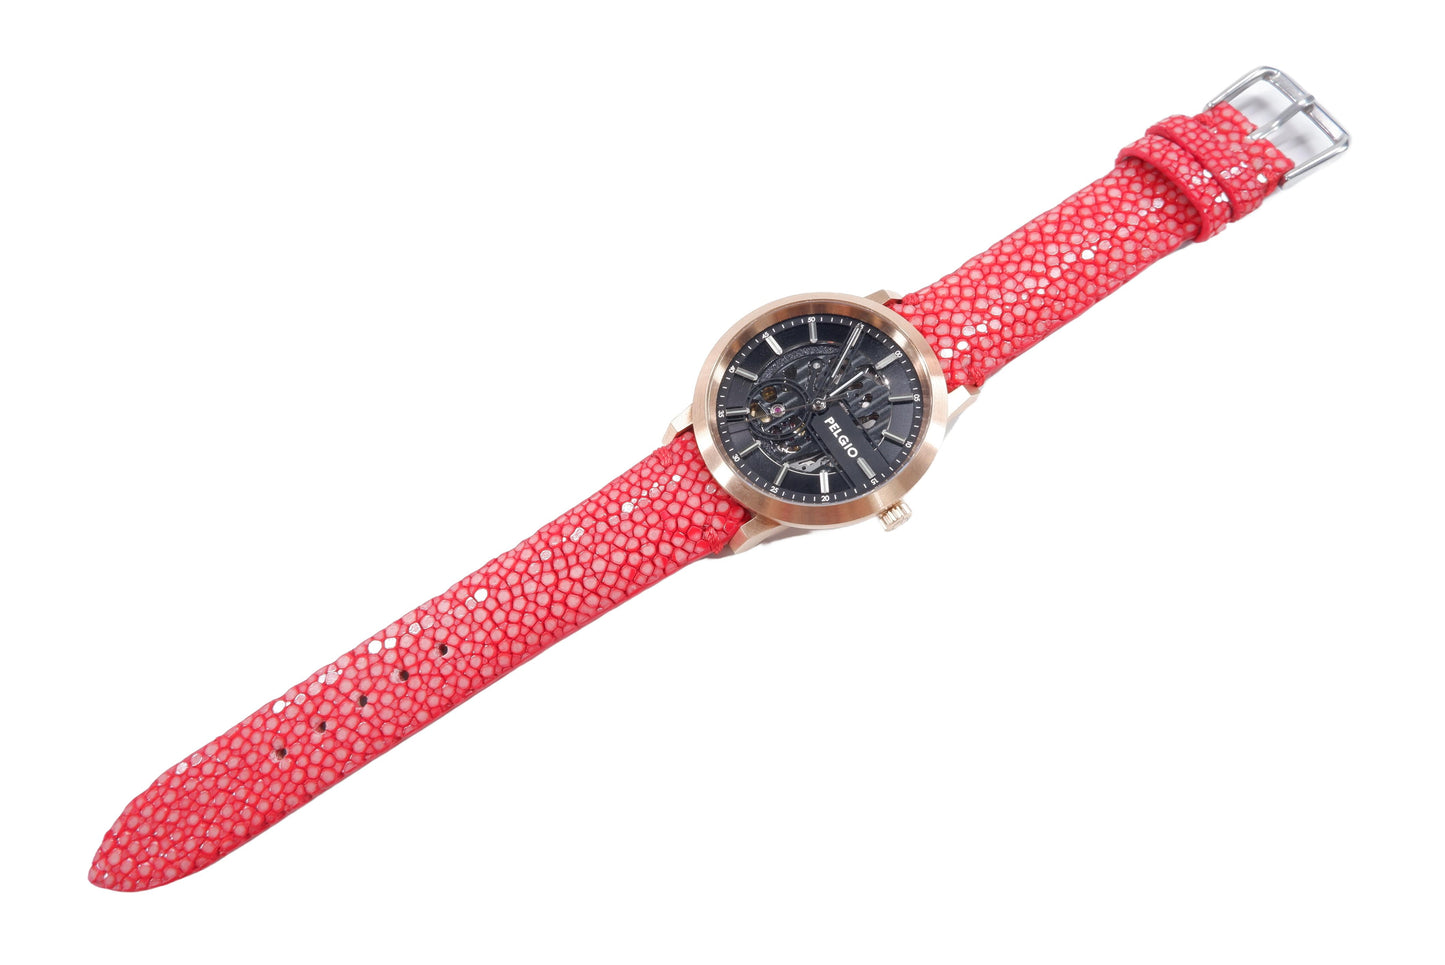 Genuine Polished Stingray Skin Leather Quick Release Watch Strap Red Band with Buckle